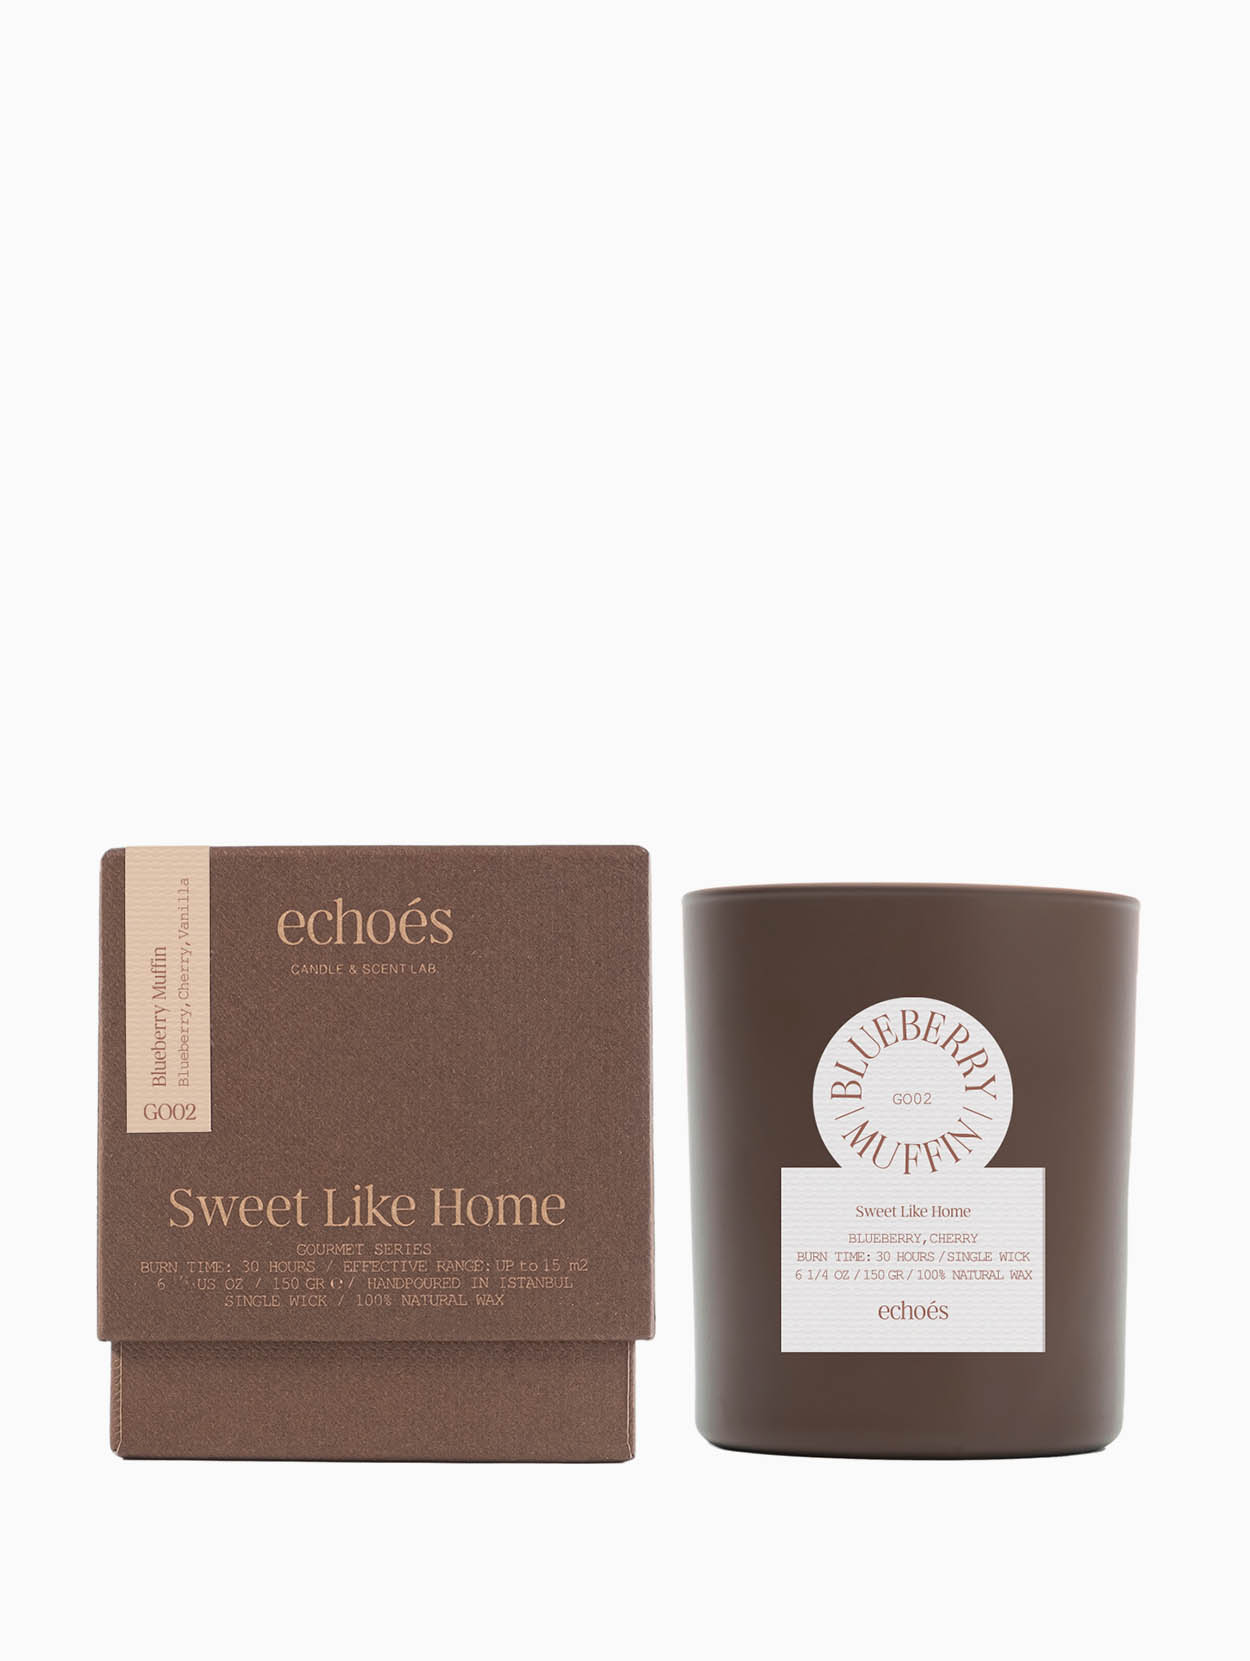 Echoes - Blueberry Muffin Single Wick Natural Candle 150 g